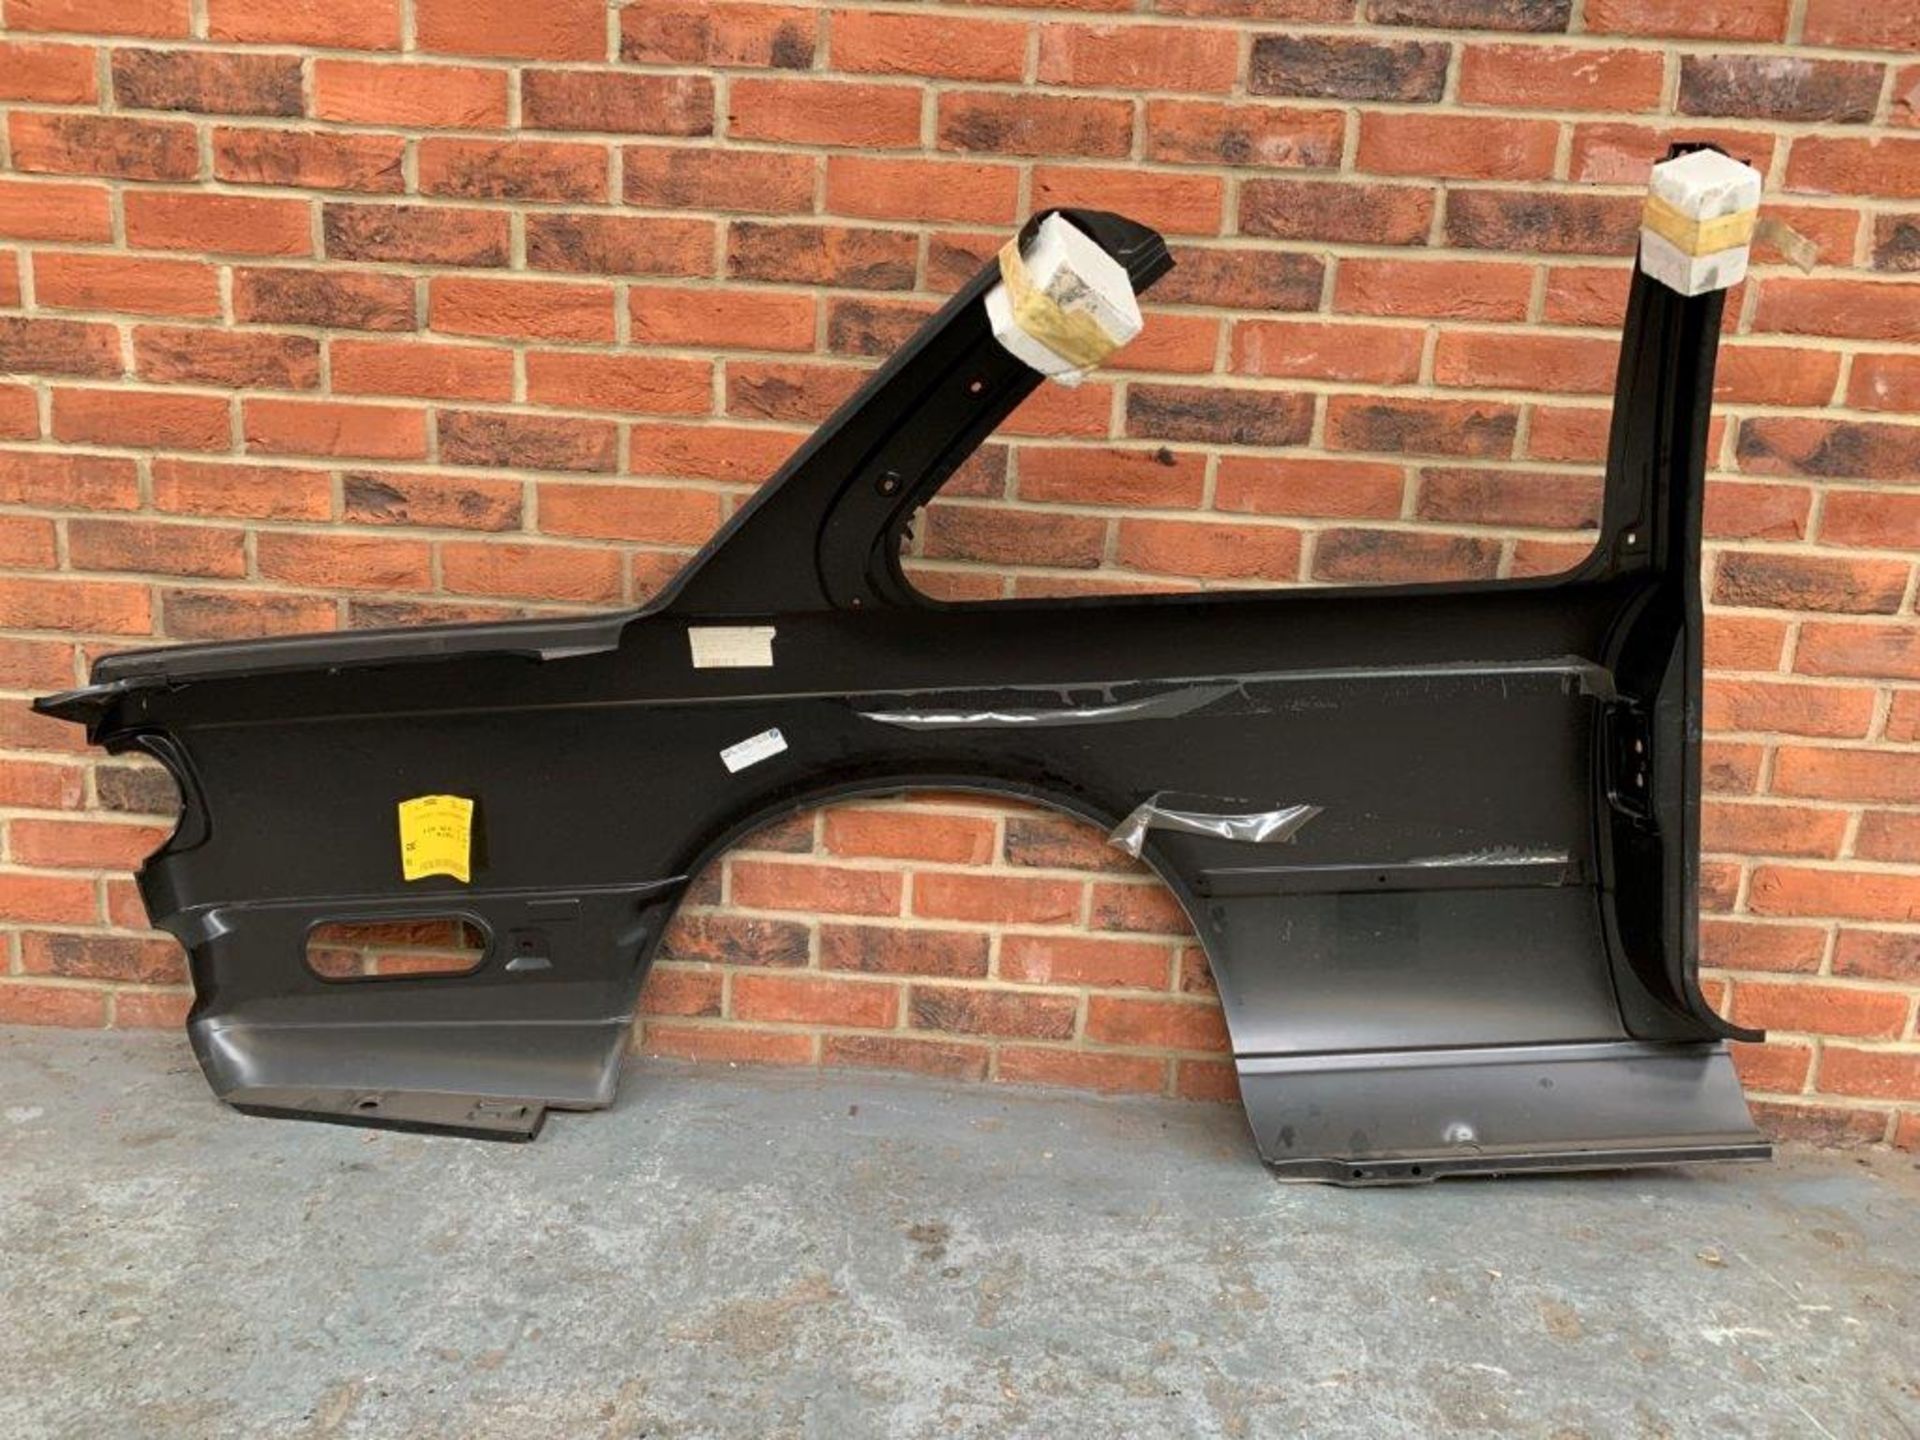 New Old Stock BMW E30 Rear Quarter Panels - Image 6 of 7